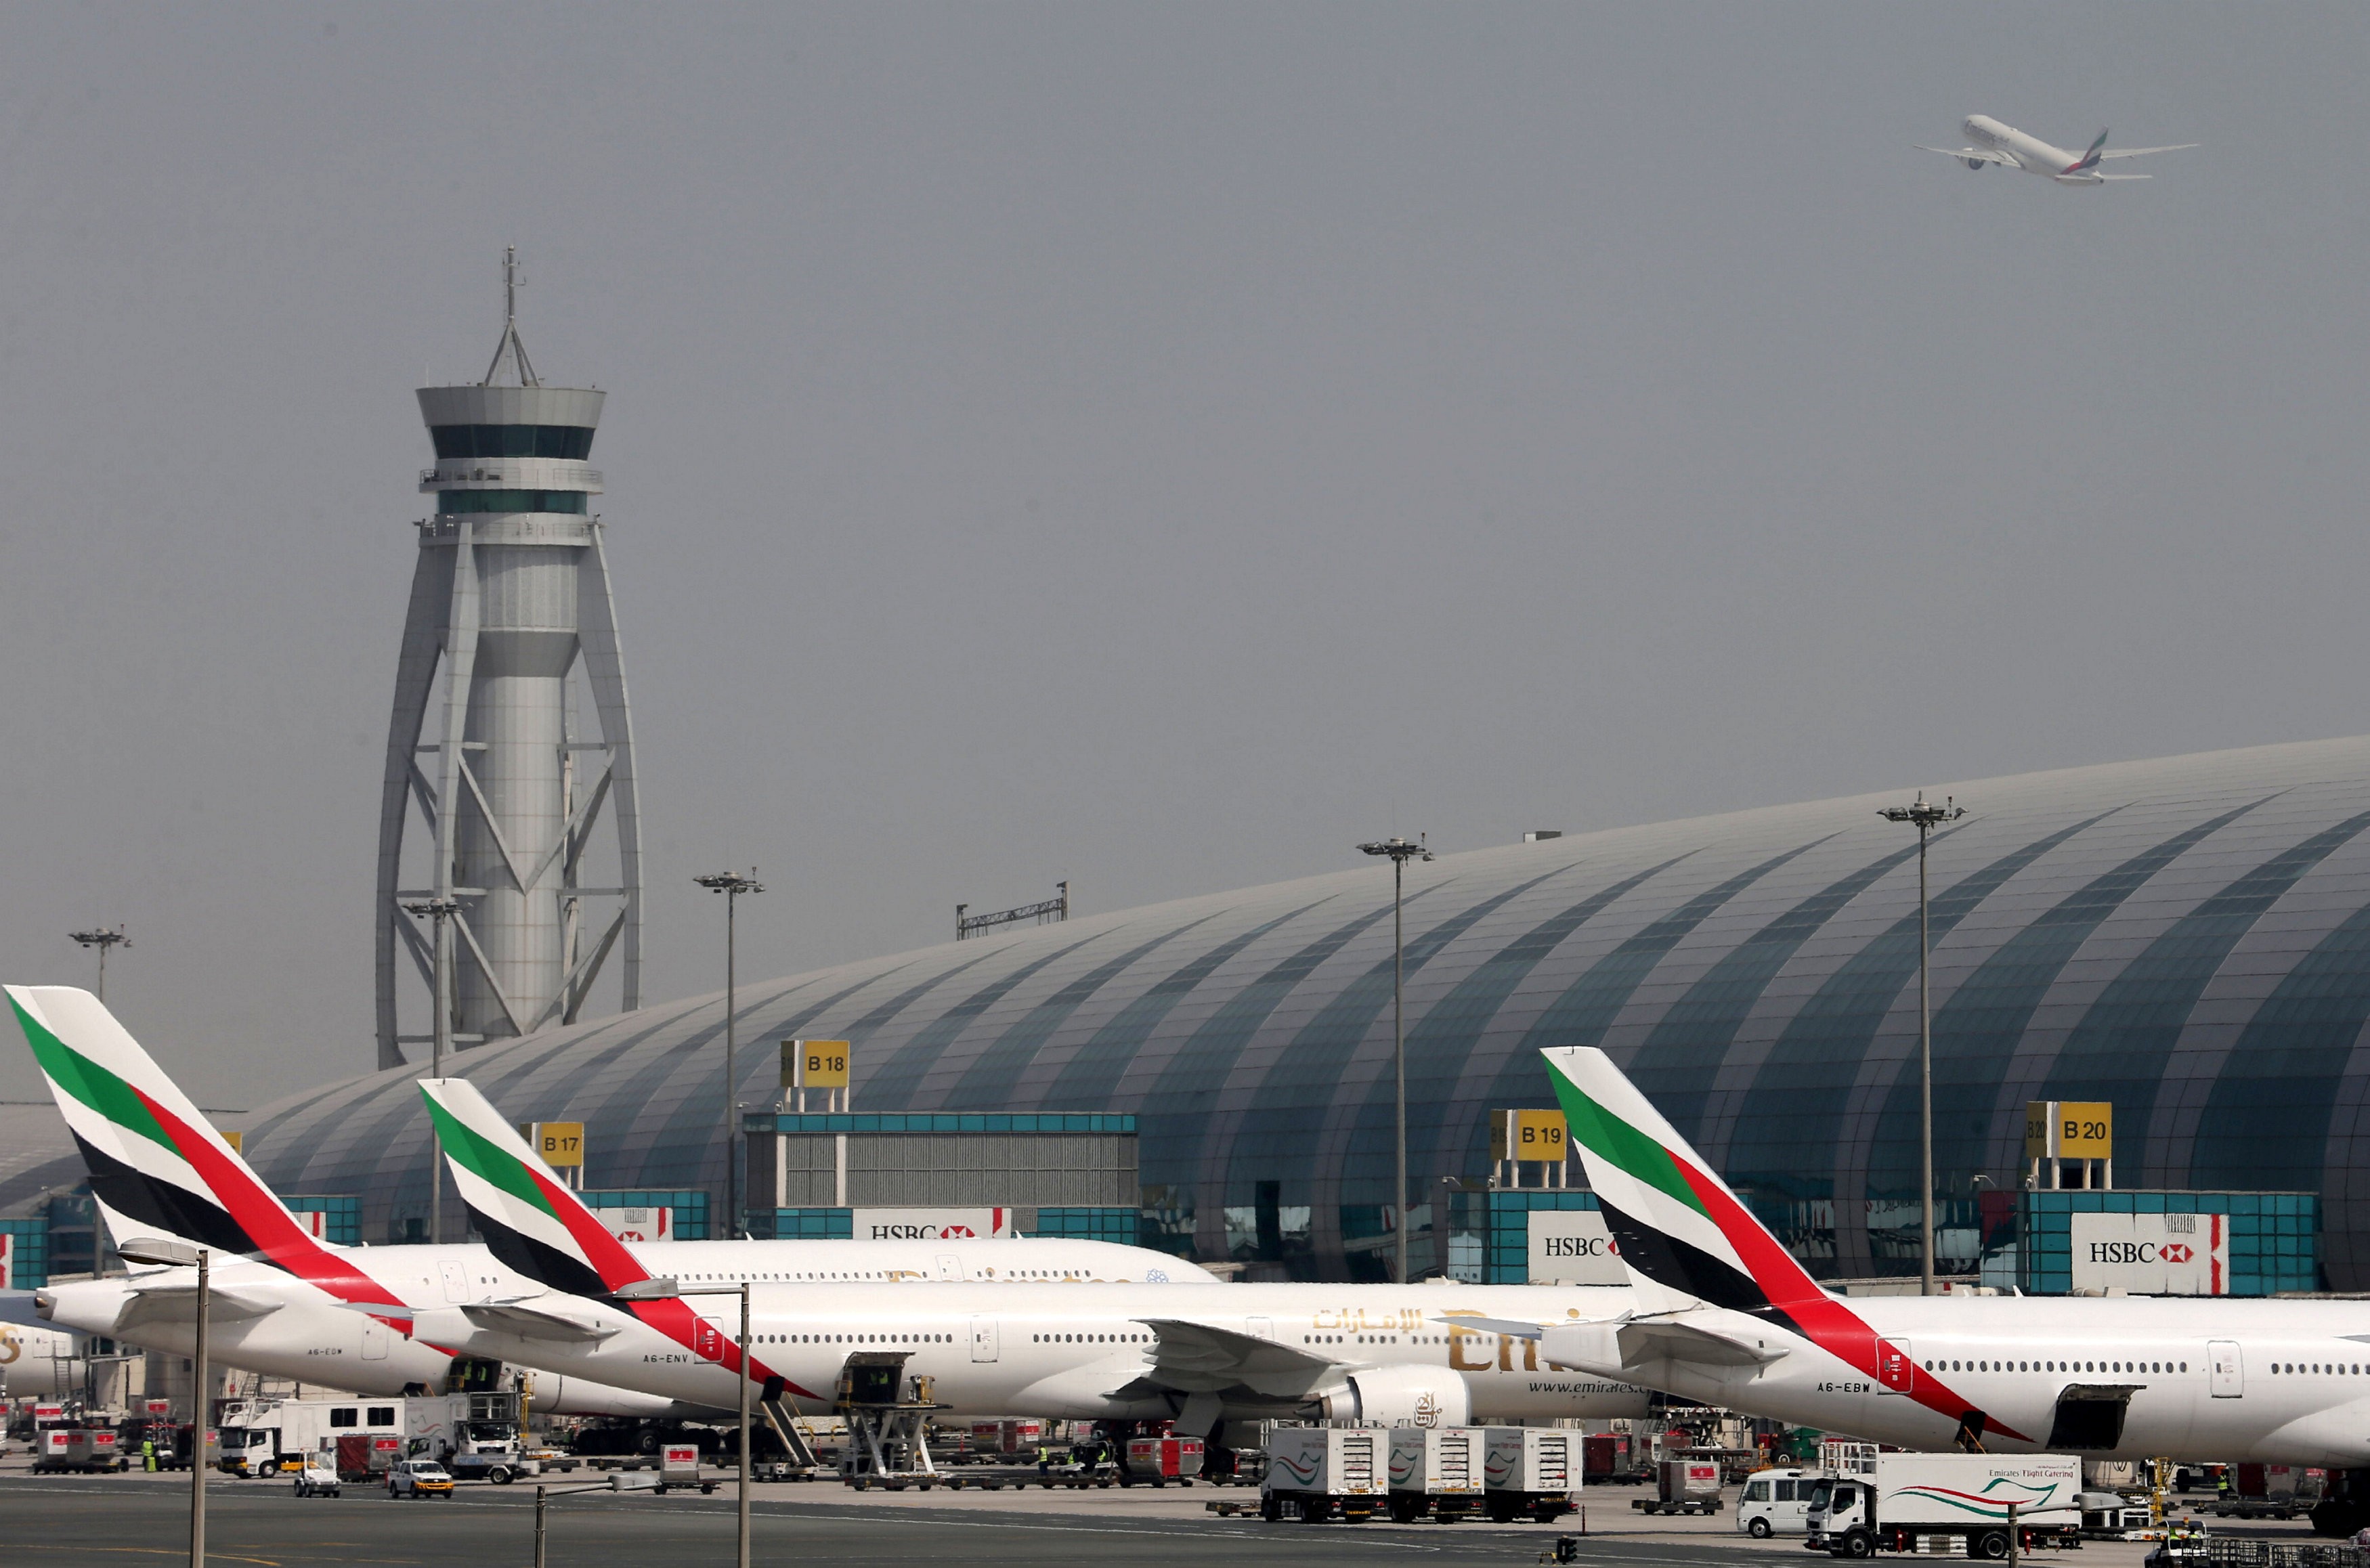 Emirates jets at Dubai International Airport. The United Arab Emirates on Monday claimed that Qatari fighter jets intercepted one of its commercial airliners in international airspace on the way to Bahrain. File photo: Reuters